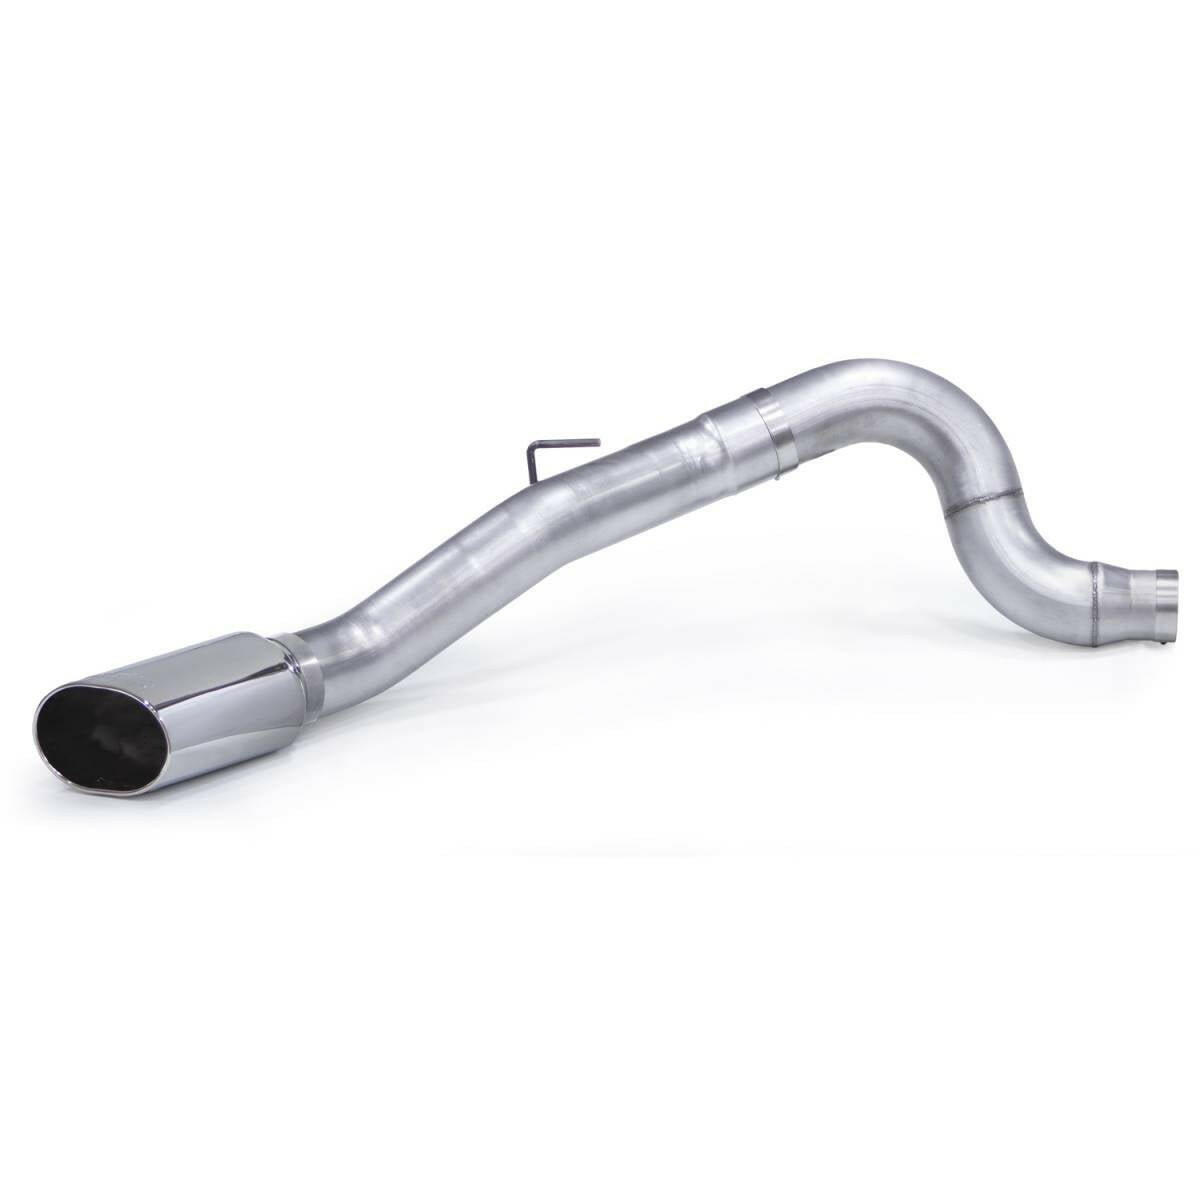 Banks Power Monster Exhaust System 5-inch Single S/S-Chrome Tip CCSB for 13-18 Ram 2500/3500 Cummins 6.7L Banks Power